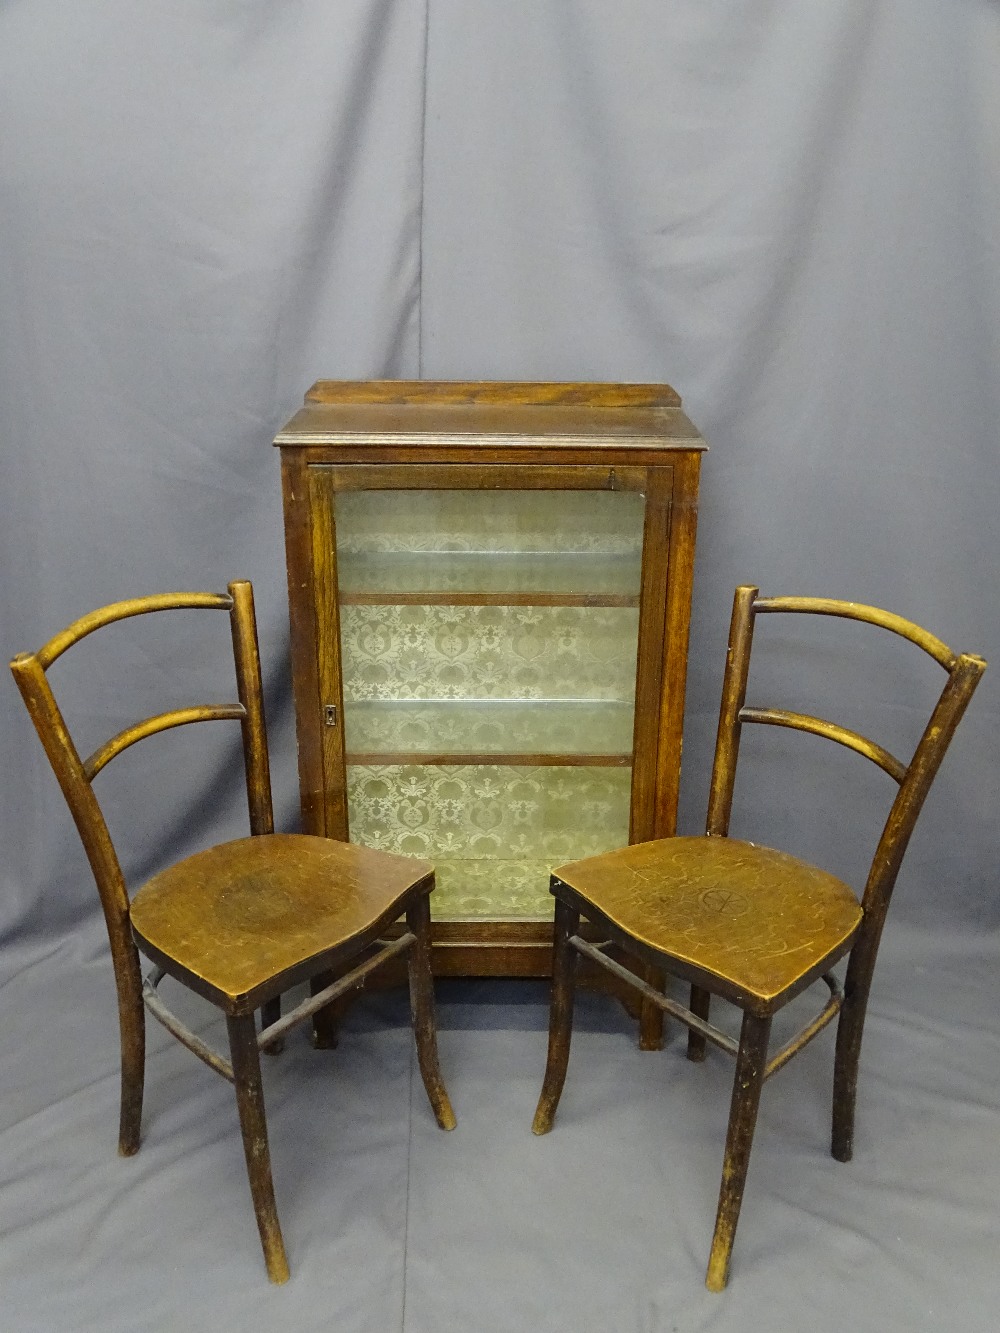 SINGLE GLAZED DOOR OAK DISPLAY CABINET and two bentwood chairs, various measurements